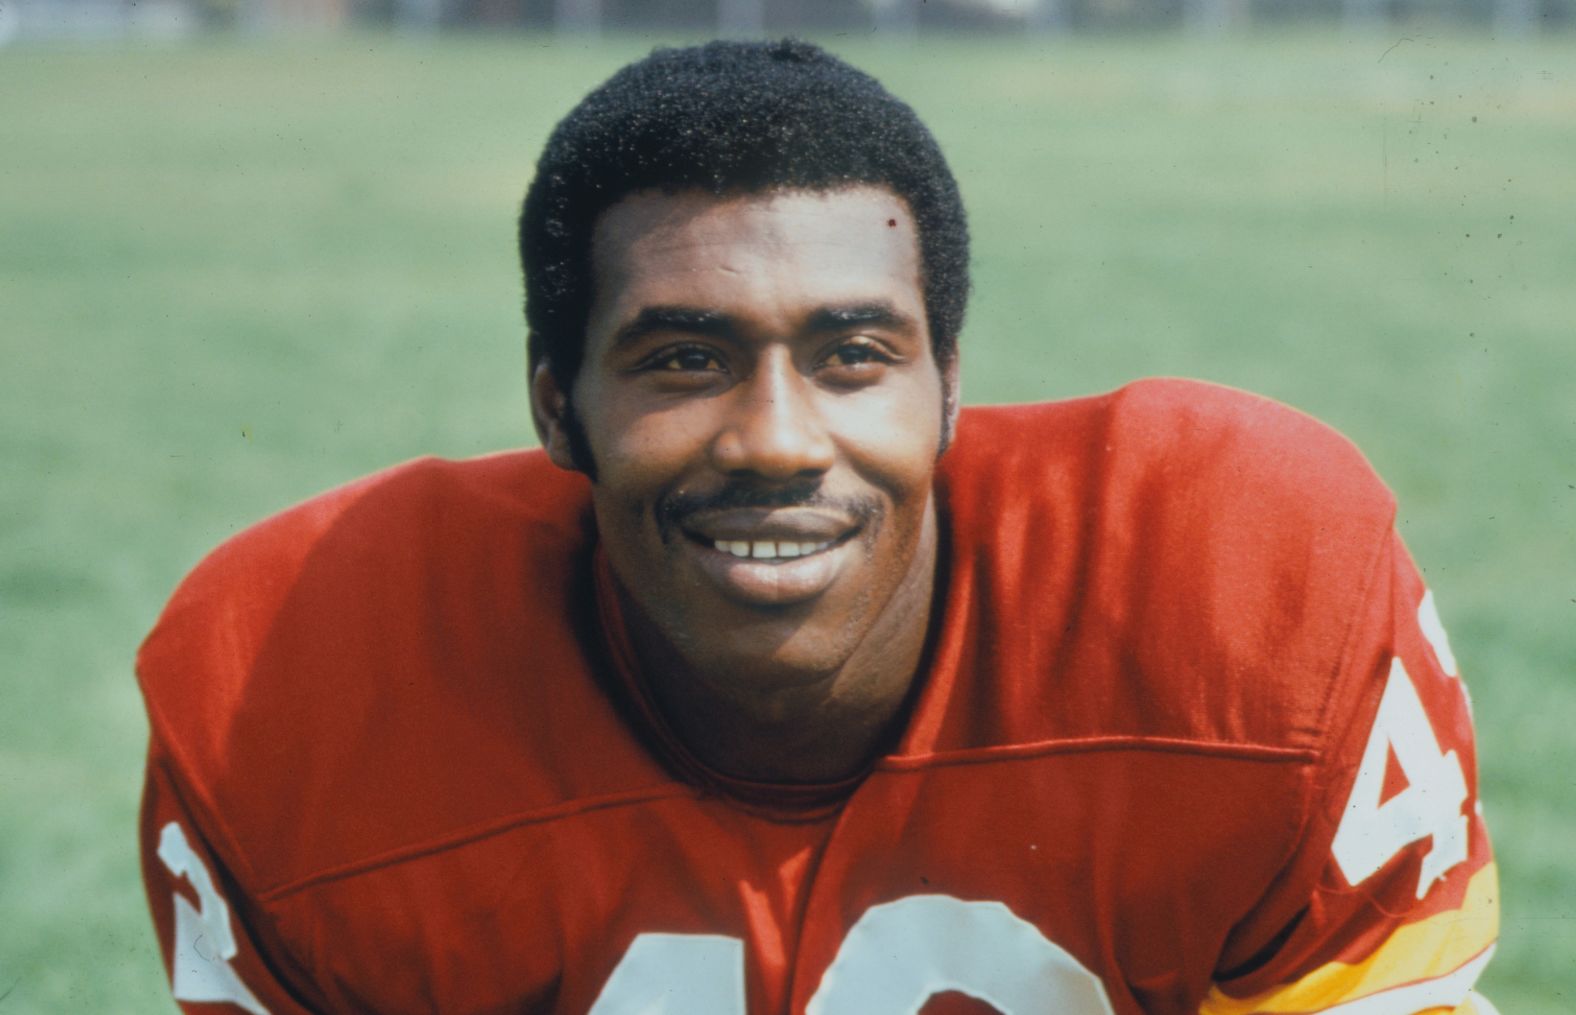 Pro Football Hall of Famer <a href="index.php?page=&url=https%3A%2F%2Fwww.cnn.com%2F2022%2F02%2F19%2Fsport%2Fcharley-taylor-pro-football-hall-of-famer-dies-spt%2Findex.html" target="_blank">Charley Taylor </a>died at the age of 80, the Washington Commanders announced on February 19. Taylor retired in 1977 as the NFL's all-time leading receiver. His record of 649 receptions for 9,110 yards and 79 touchdowns would stand until 1984.